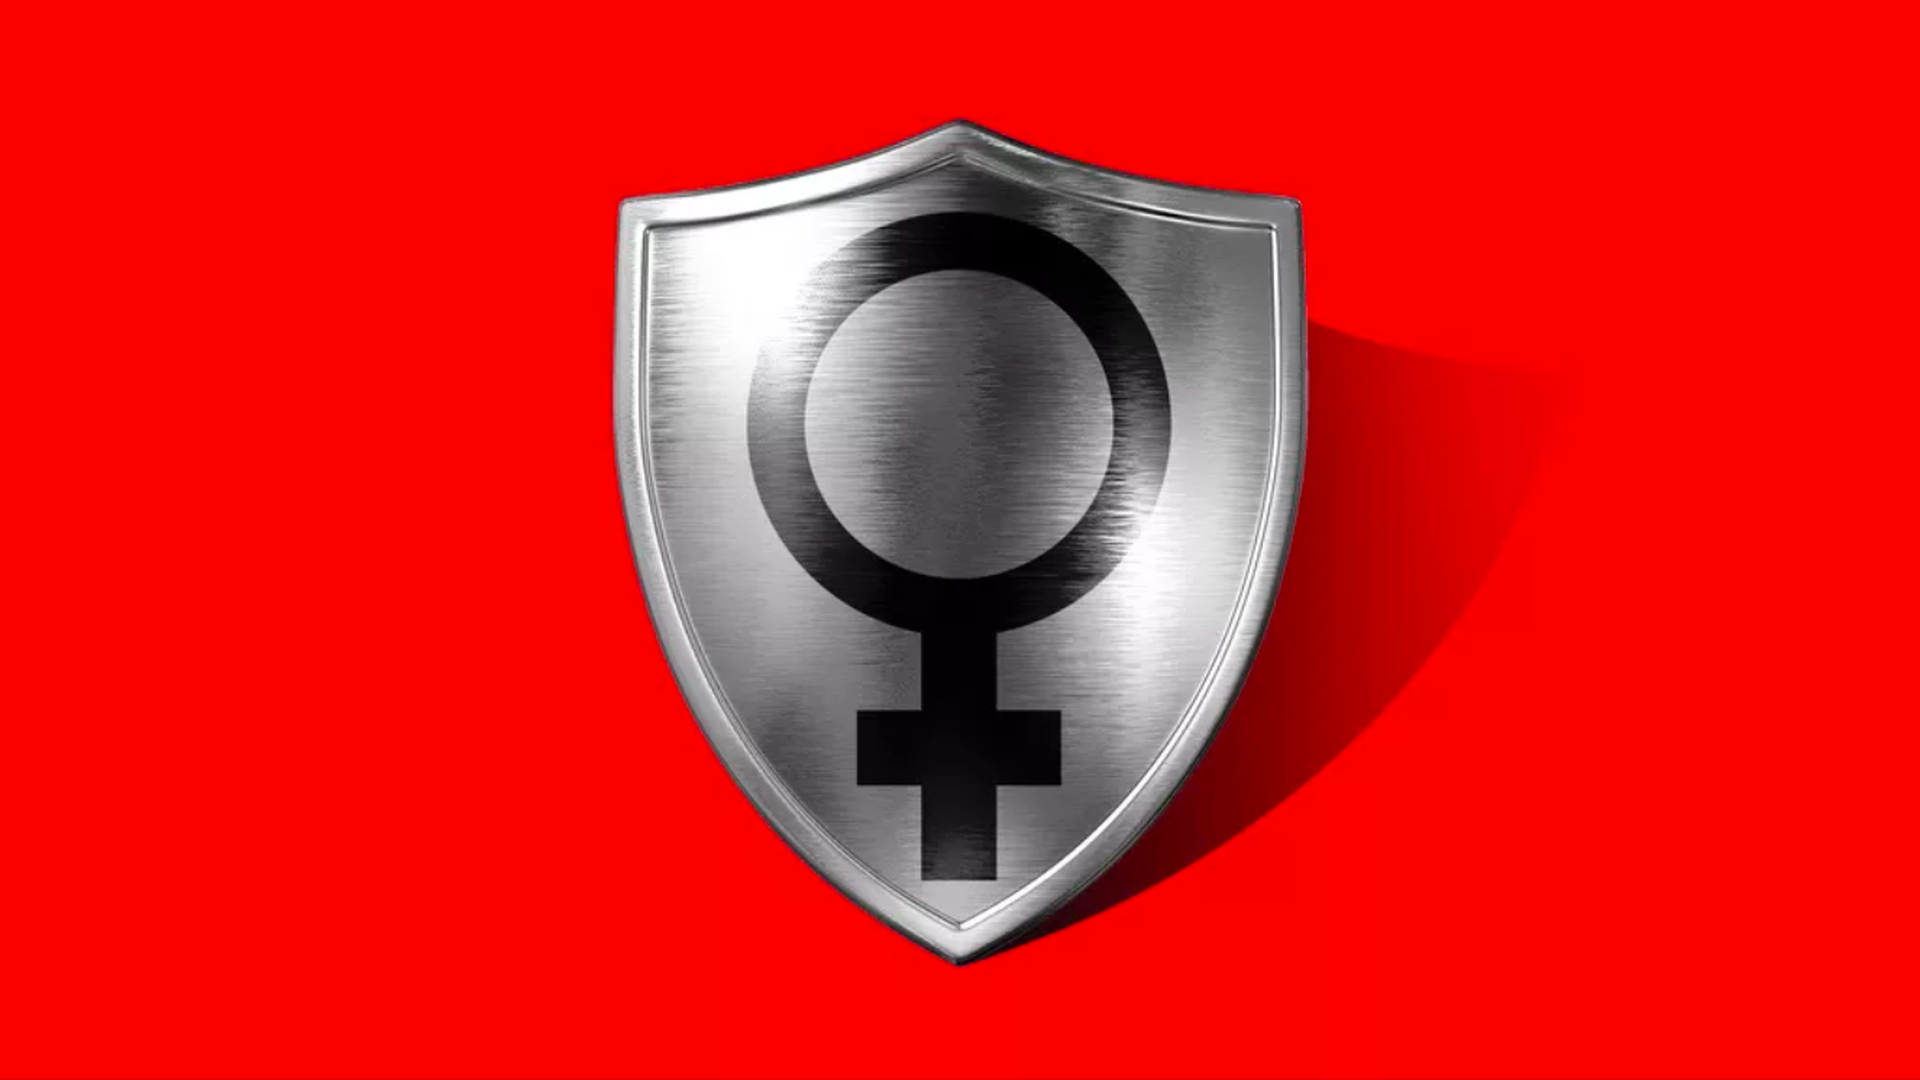 This illustration shows a metal shield emblazoned with the female symbol on a red background.